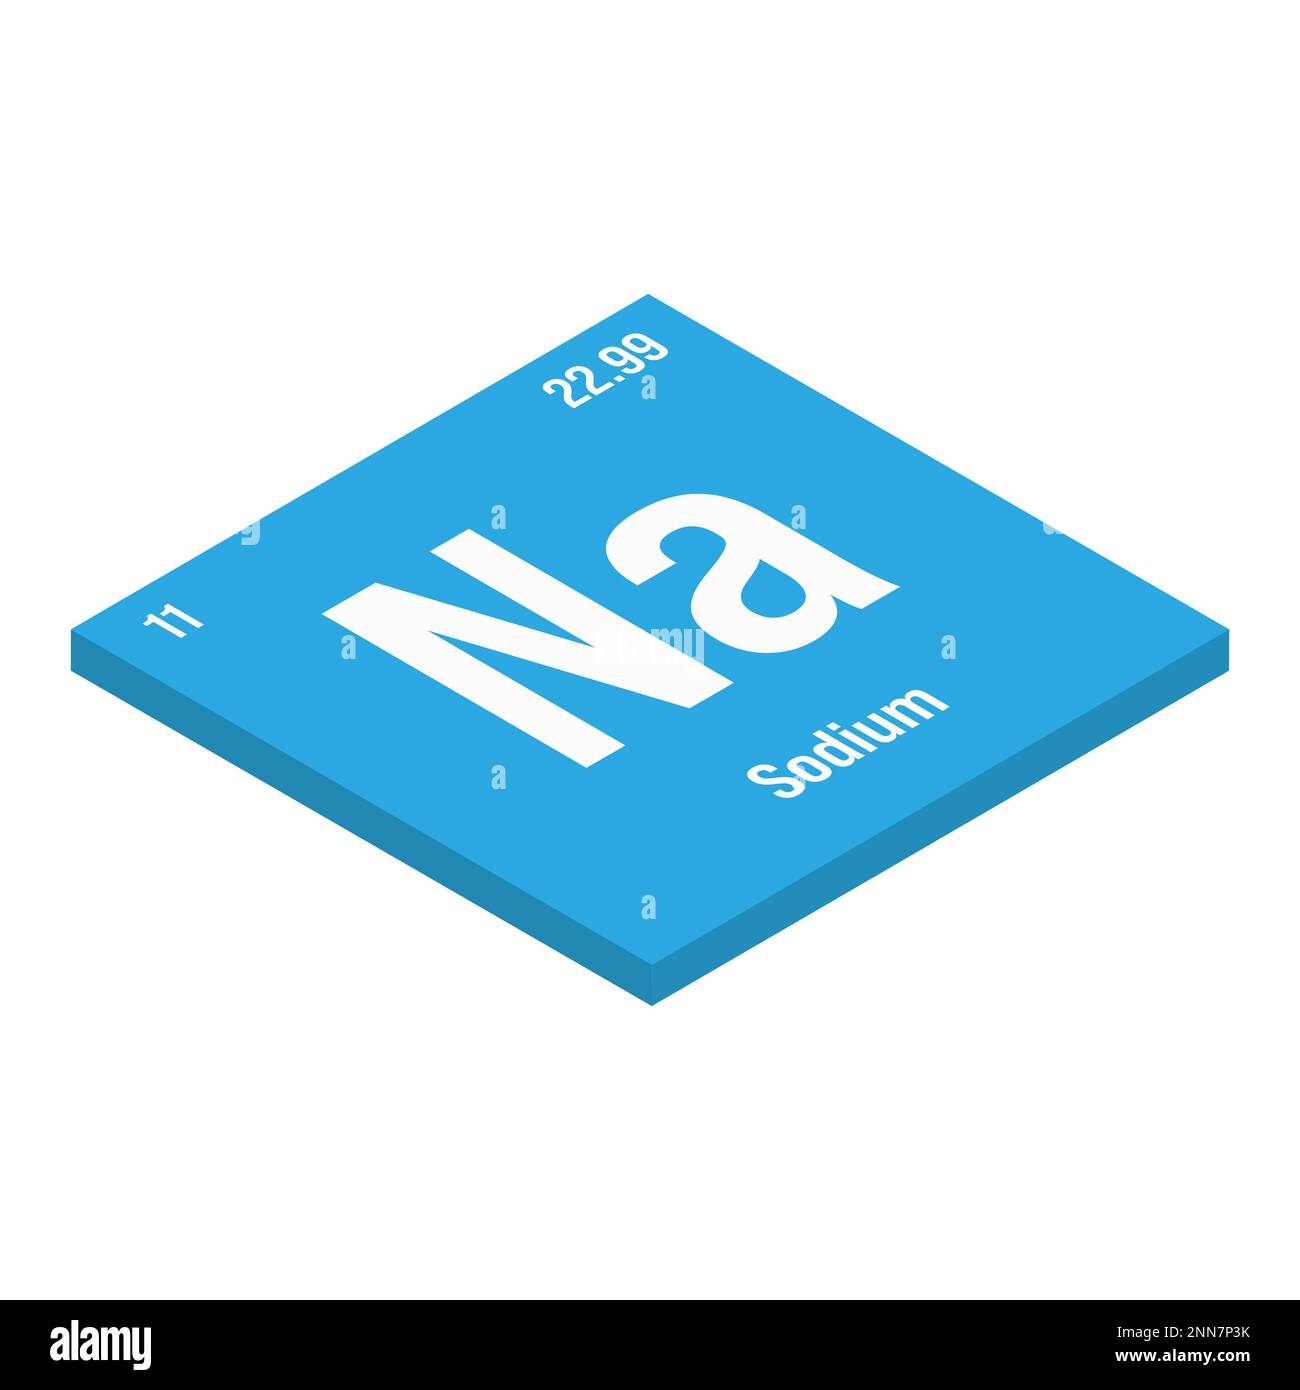 Sodium, Na, periodic table element with name, symbol, atomic number and weight. Alkali metal with various industrial uses, such as in soap, certain types of glass, and as a medication for certain medical conditions. Stock Vector